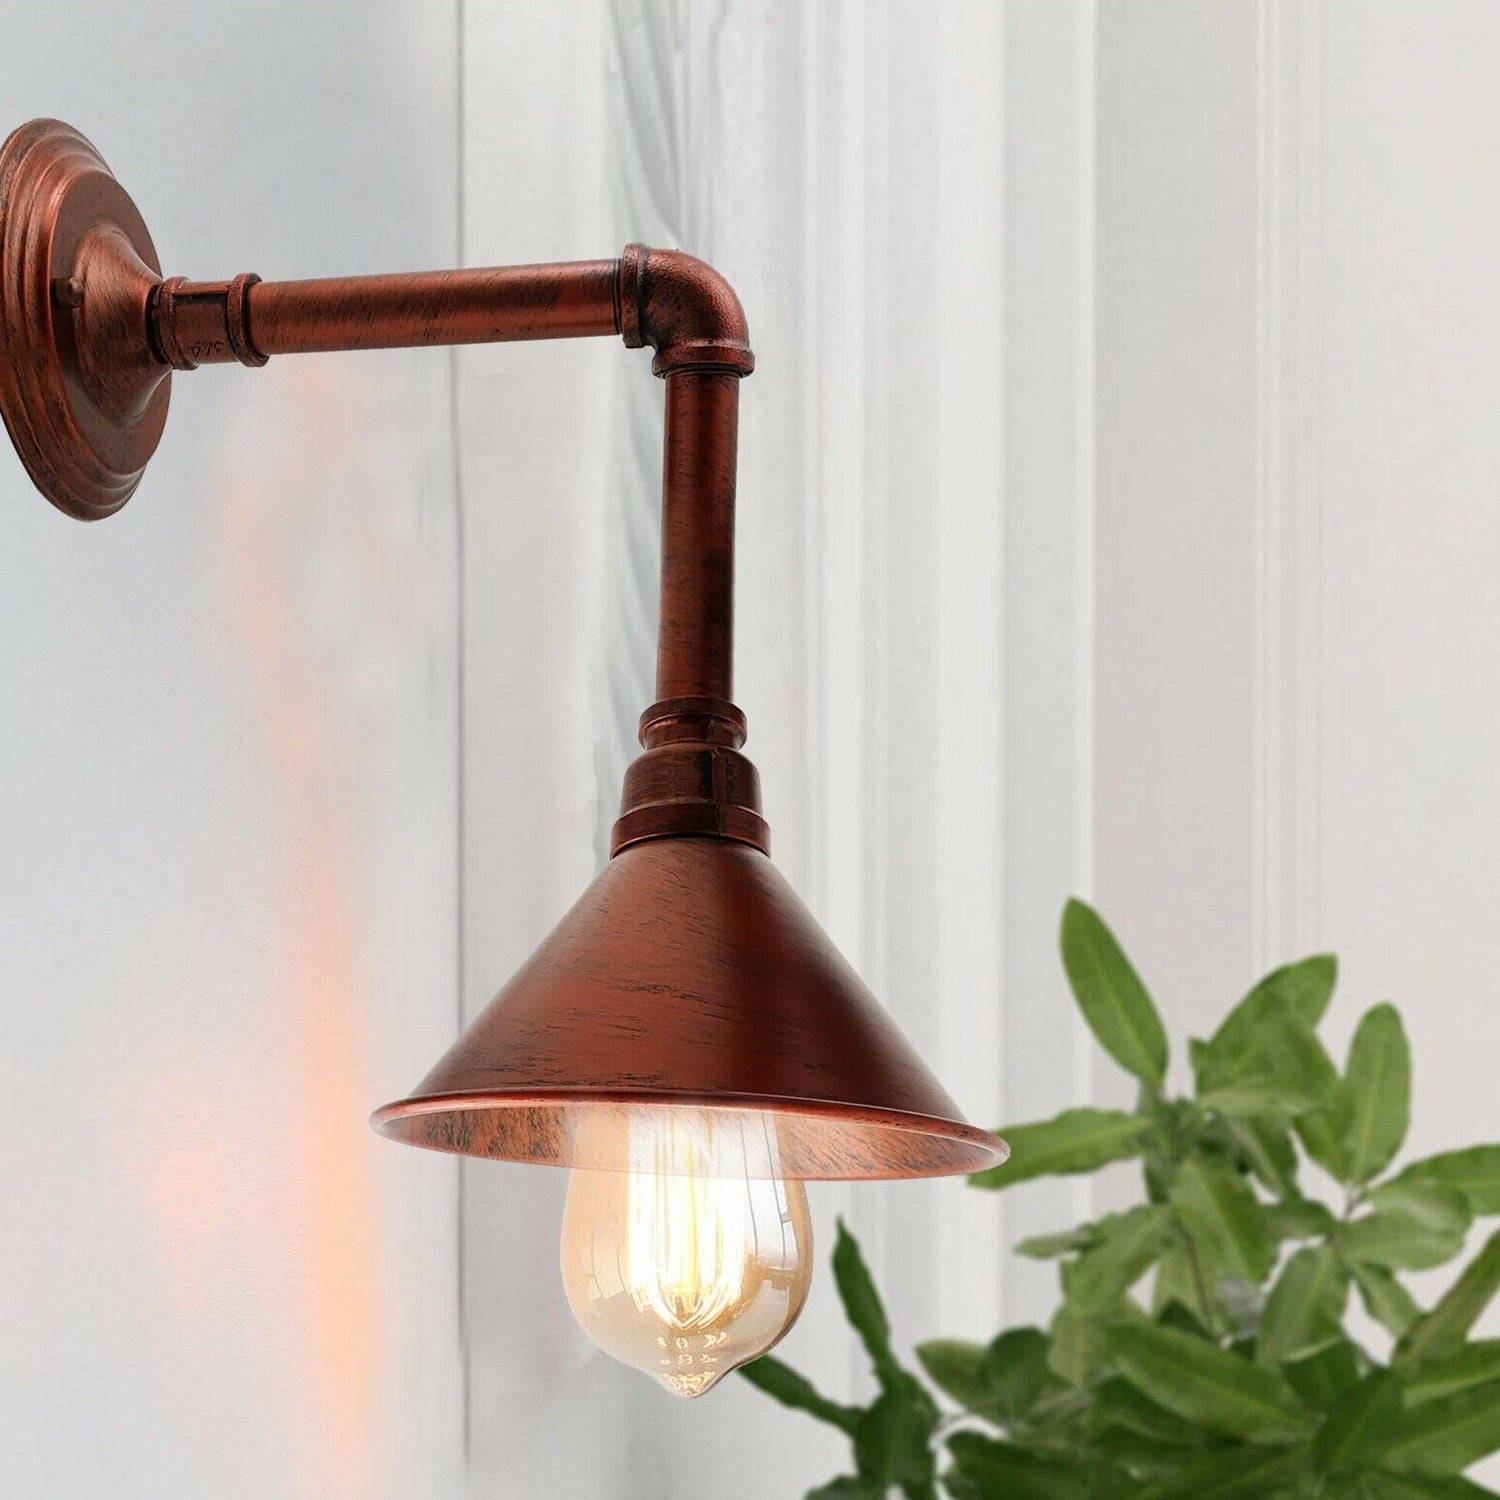 Wall Pipe Lamp Retro Light Steampunk Vintage Wall Sconce Lights~2607